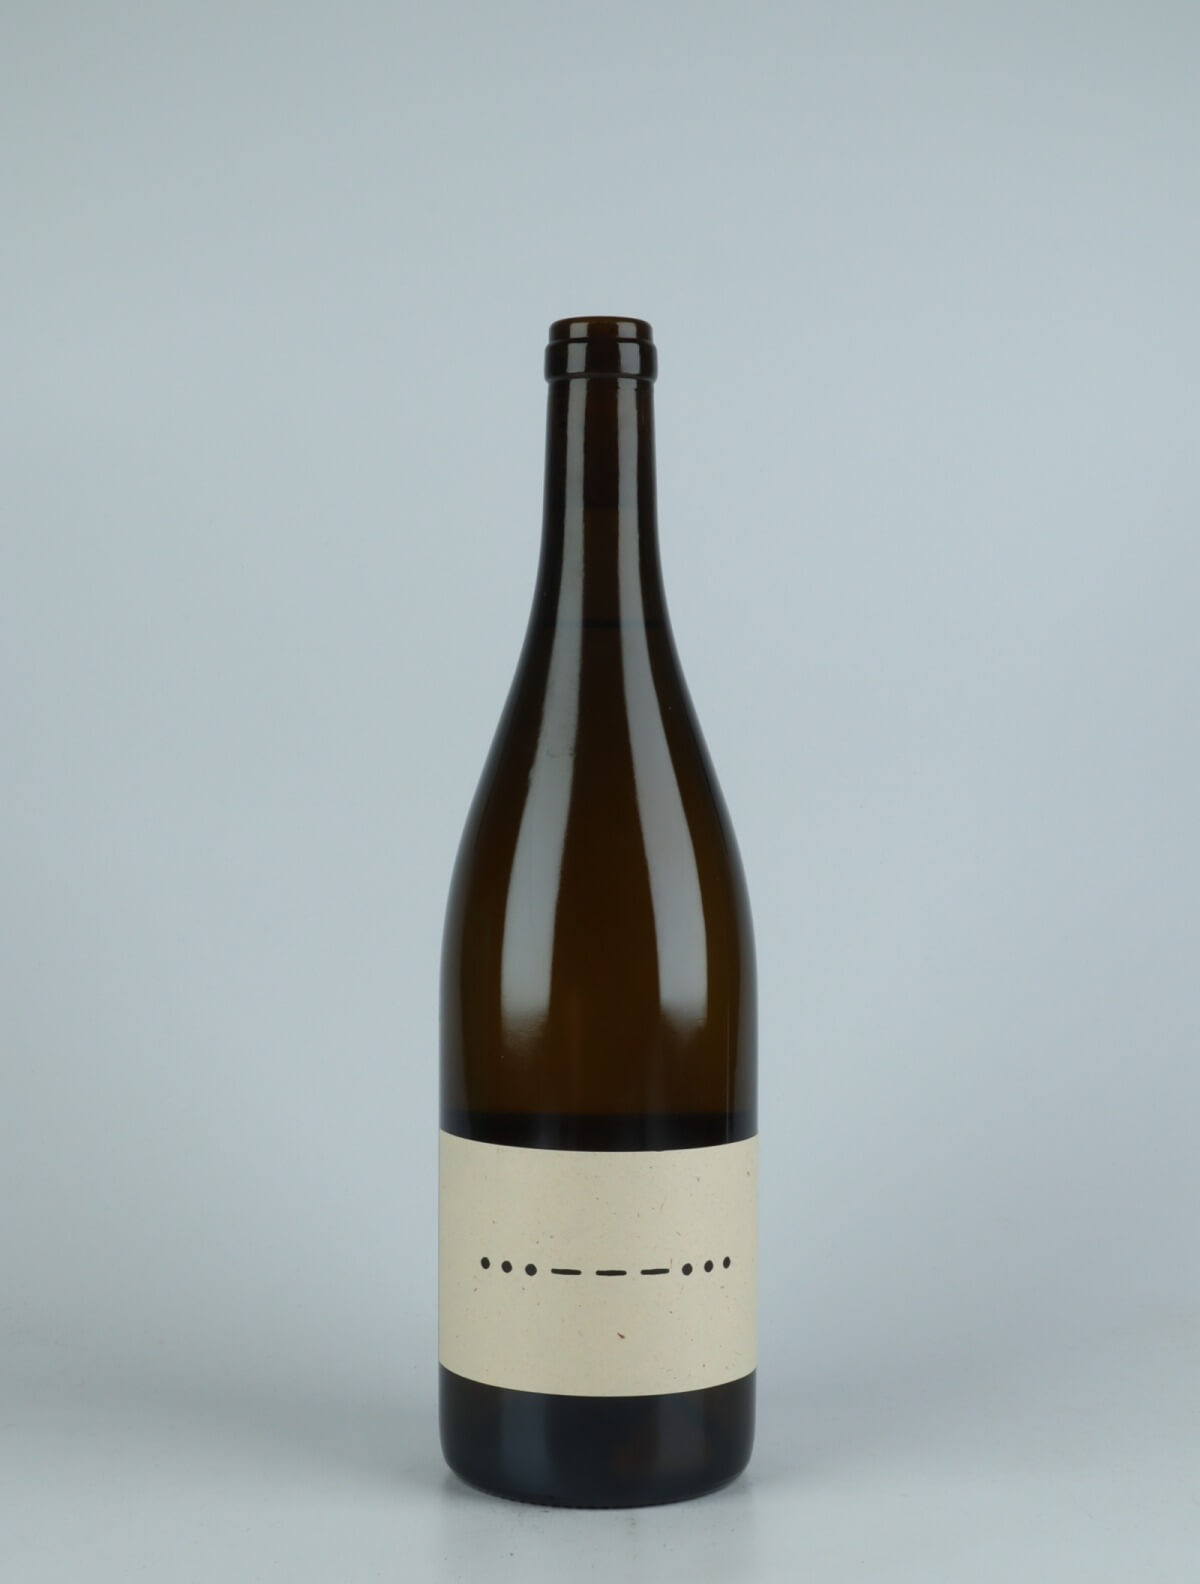 A bottle 2020 S.O.S Weiss White wine from Konni & Evi, Saale-Unstrut in Germany